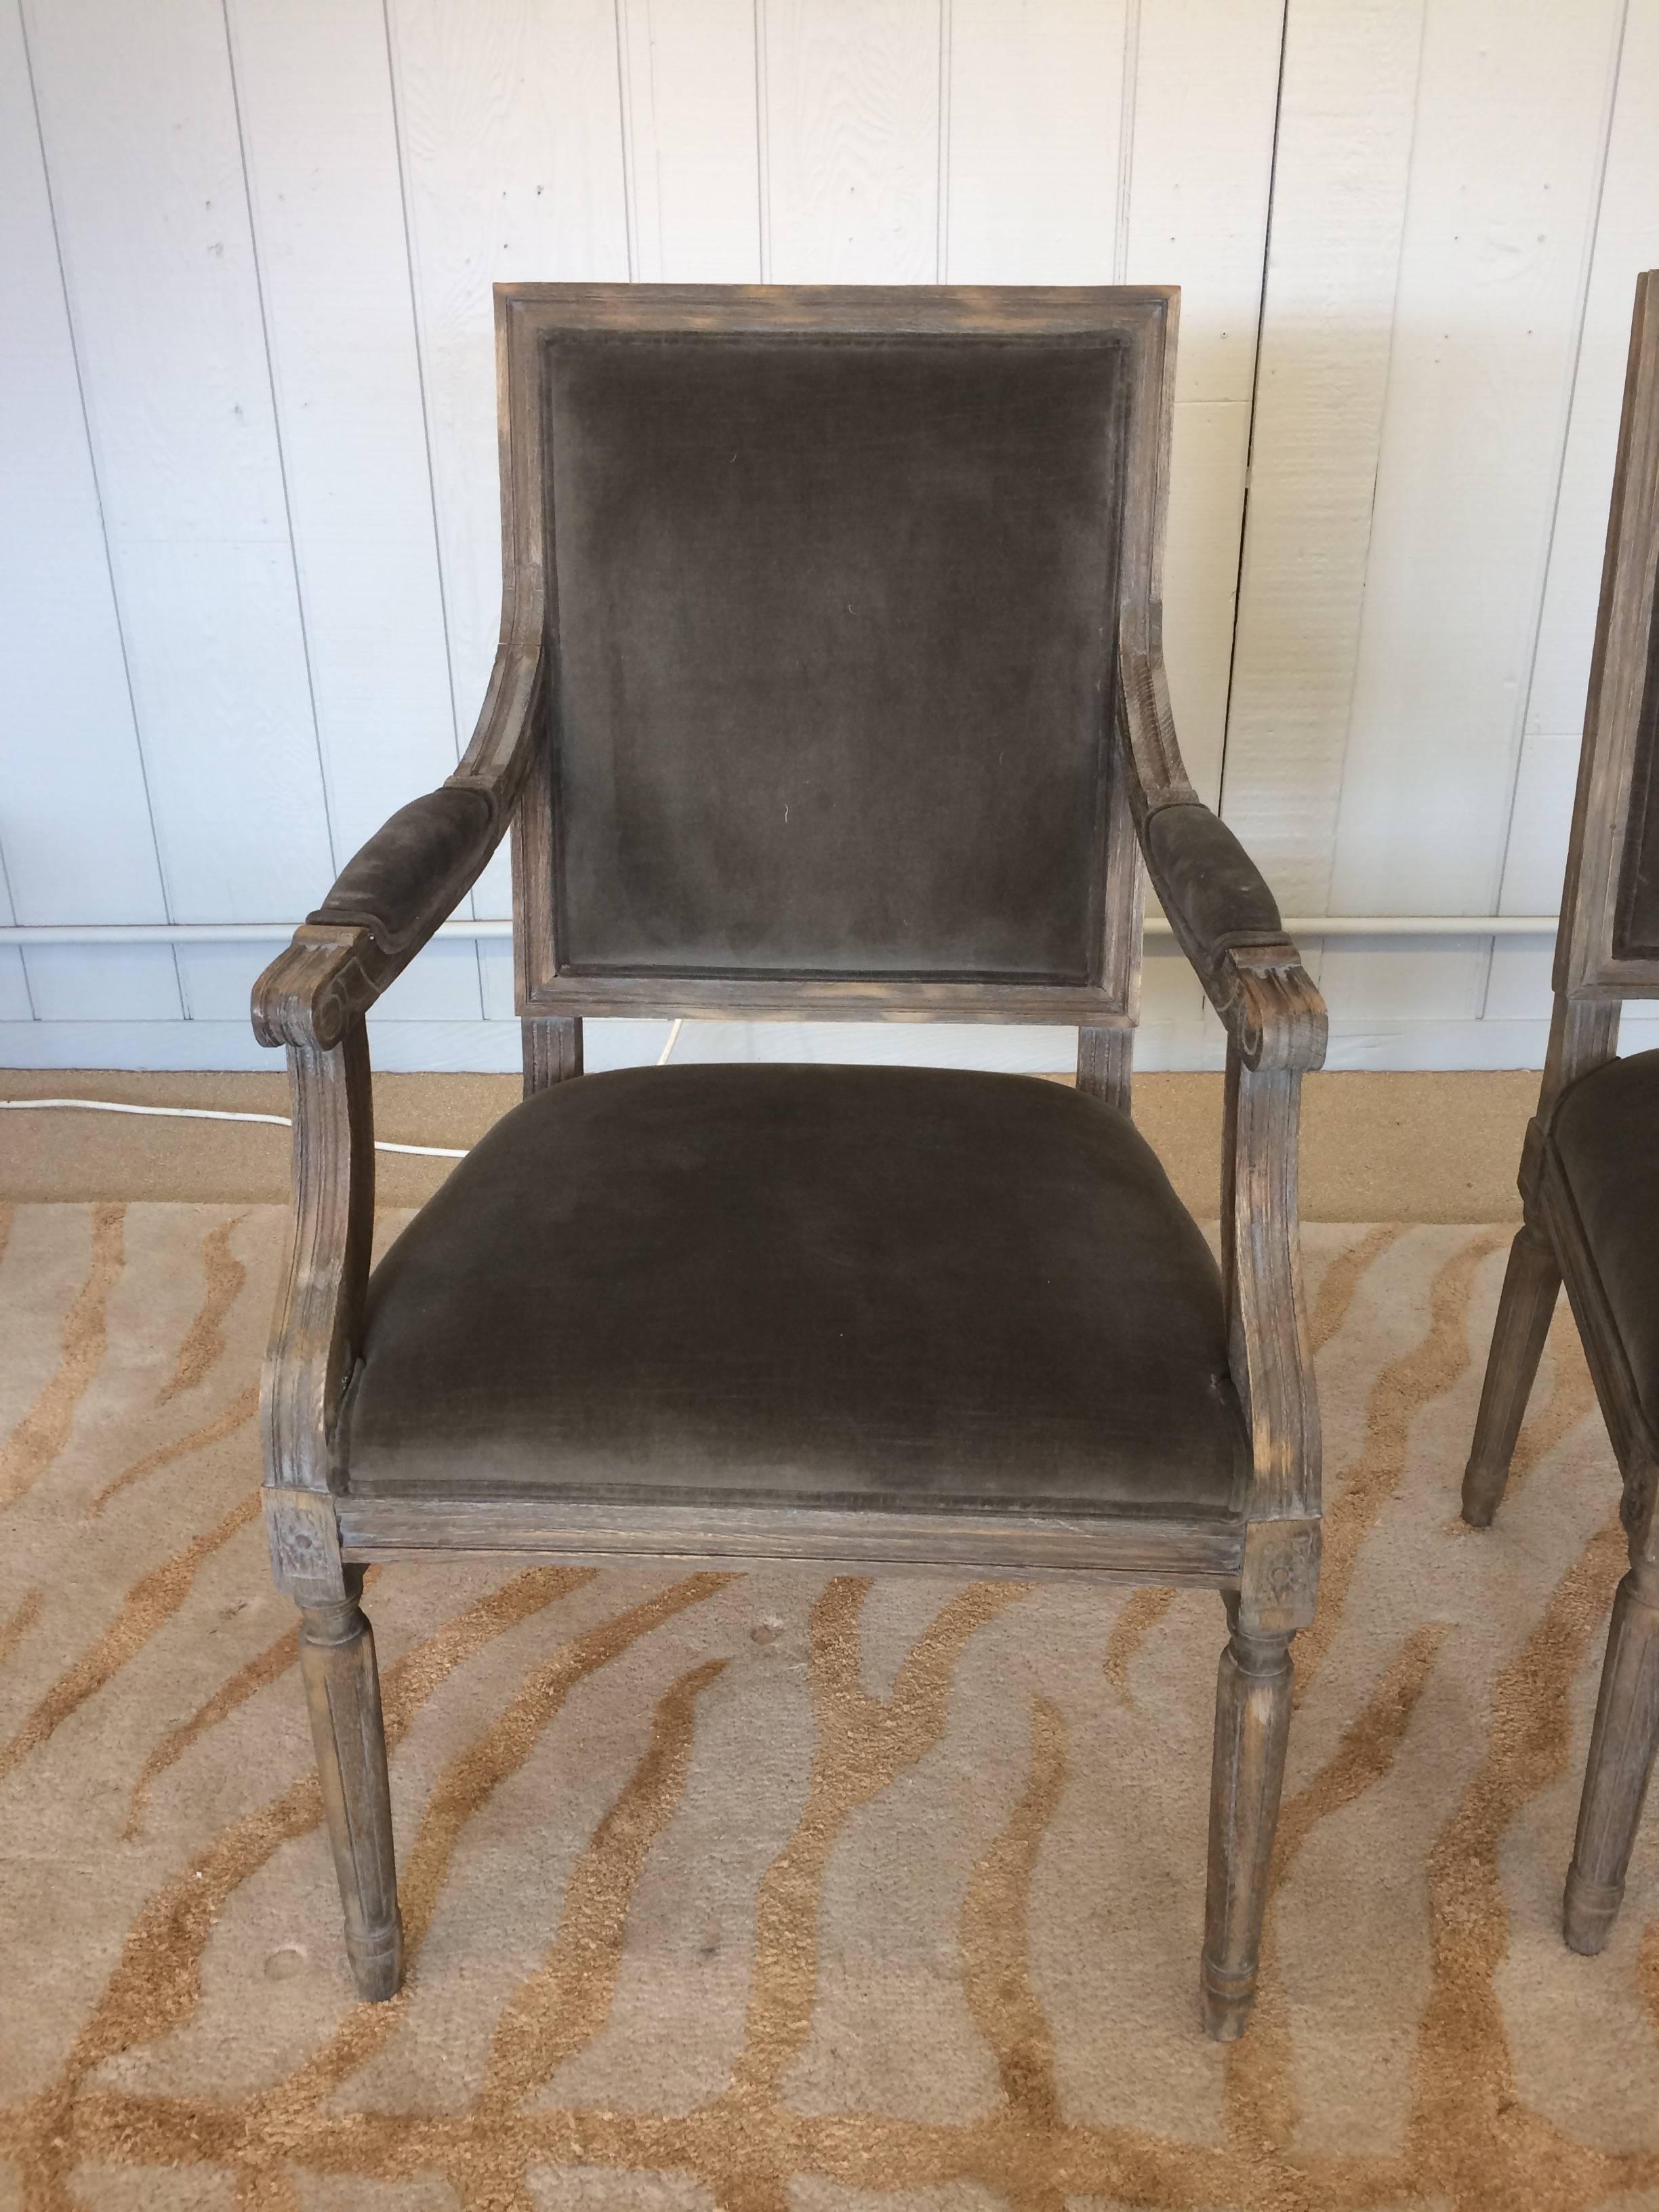 Stately set of six French style Dining chairs by Restoration Hardware. White washed oak in taupe cotton velvet. Pretty carving on legs. Two armchairs, four side chairs. Each measures 18